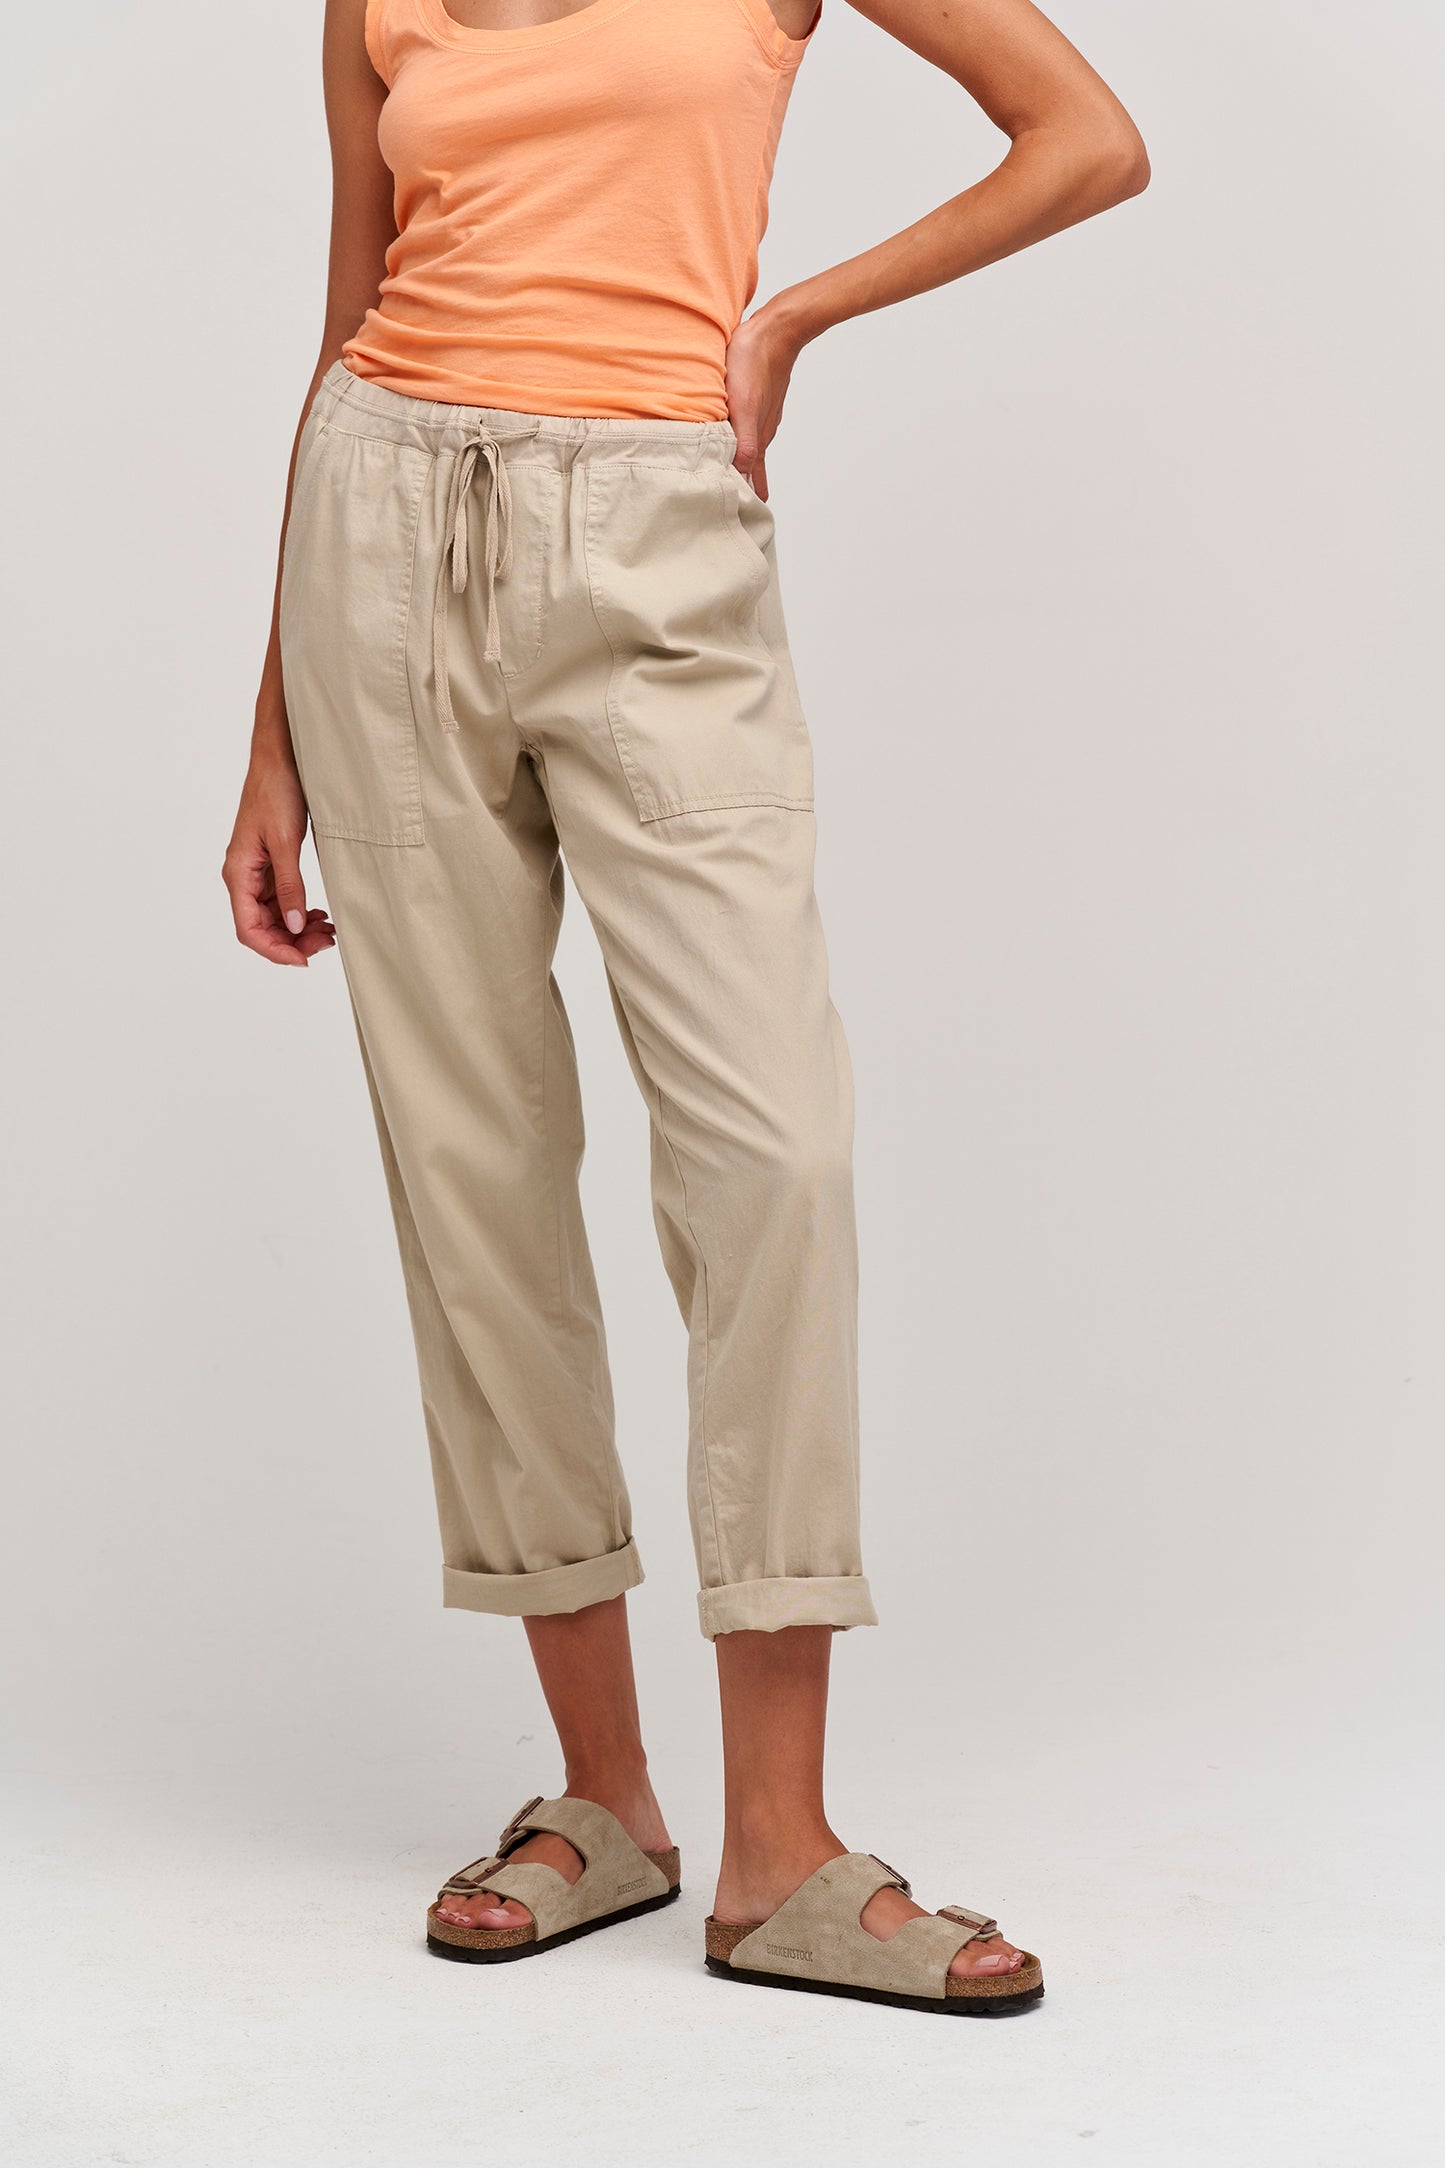 MISTY PANT COTTWILL IN OATMEAL